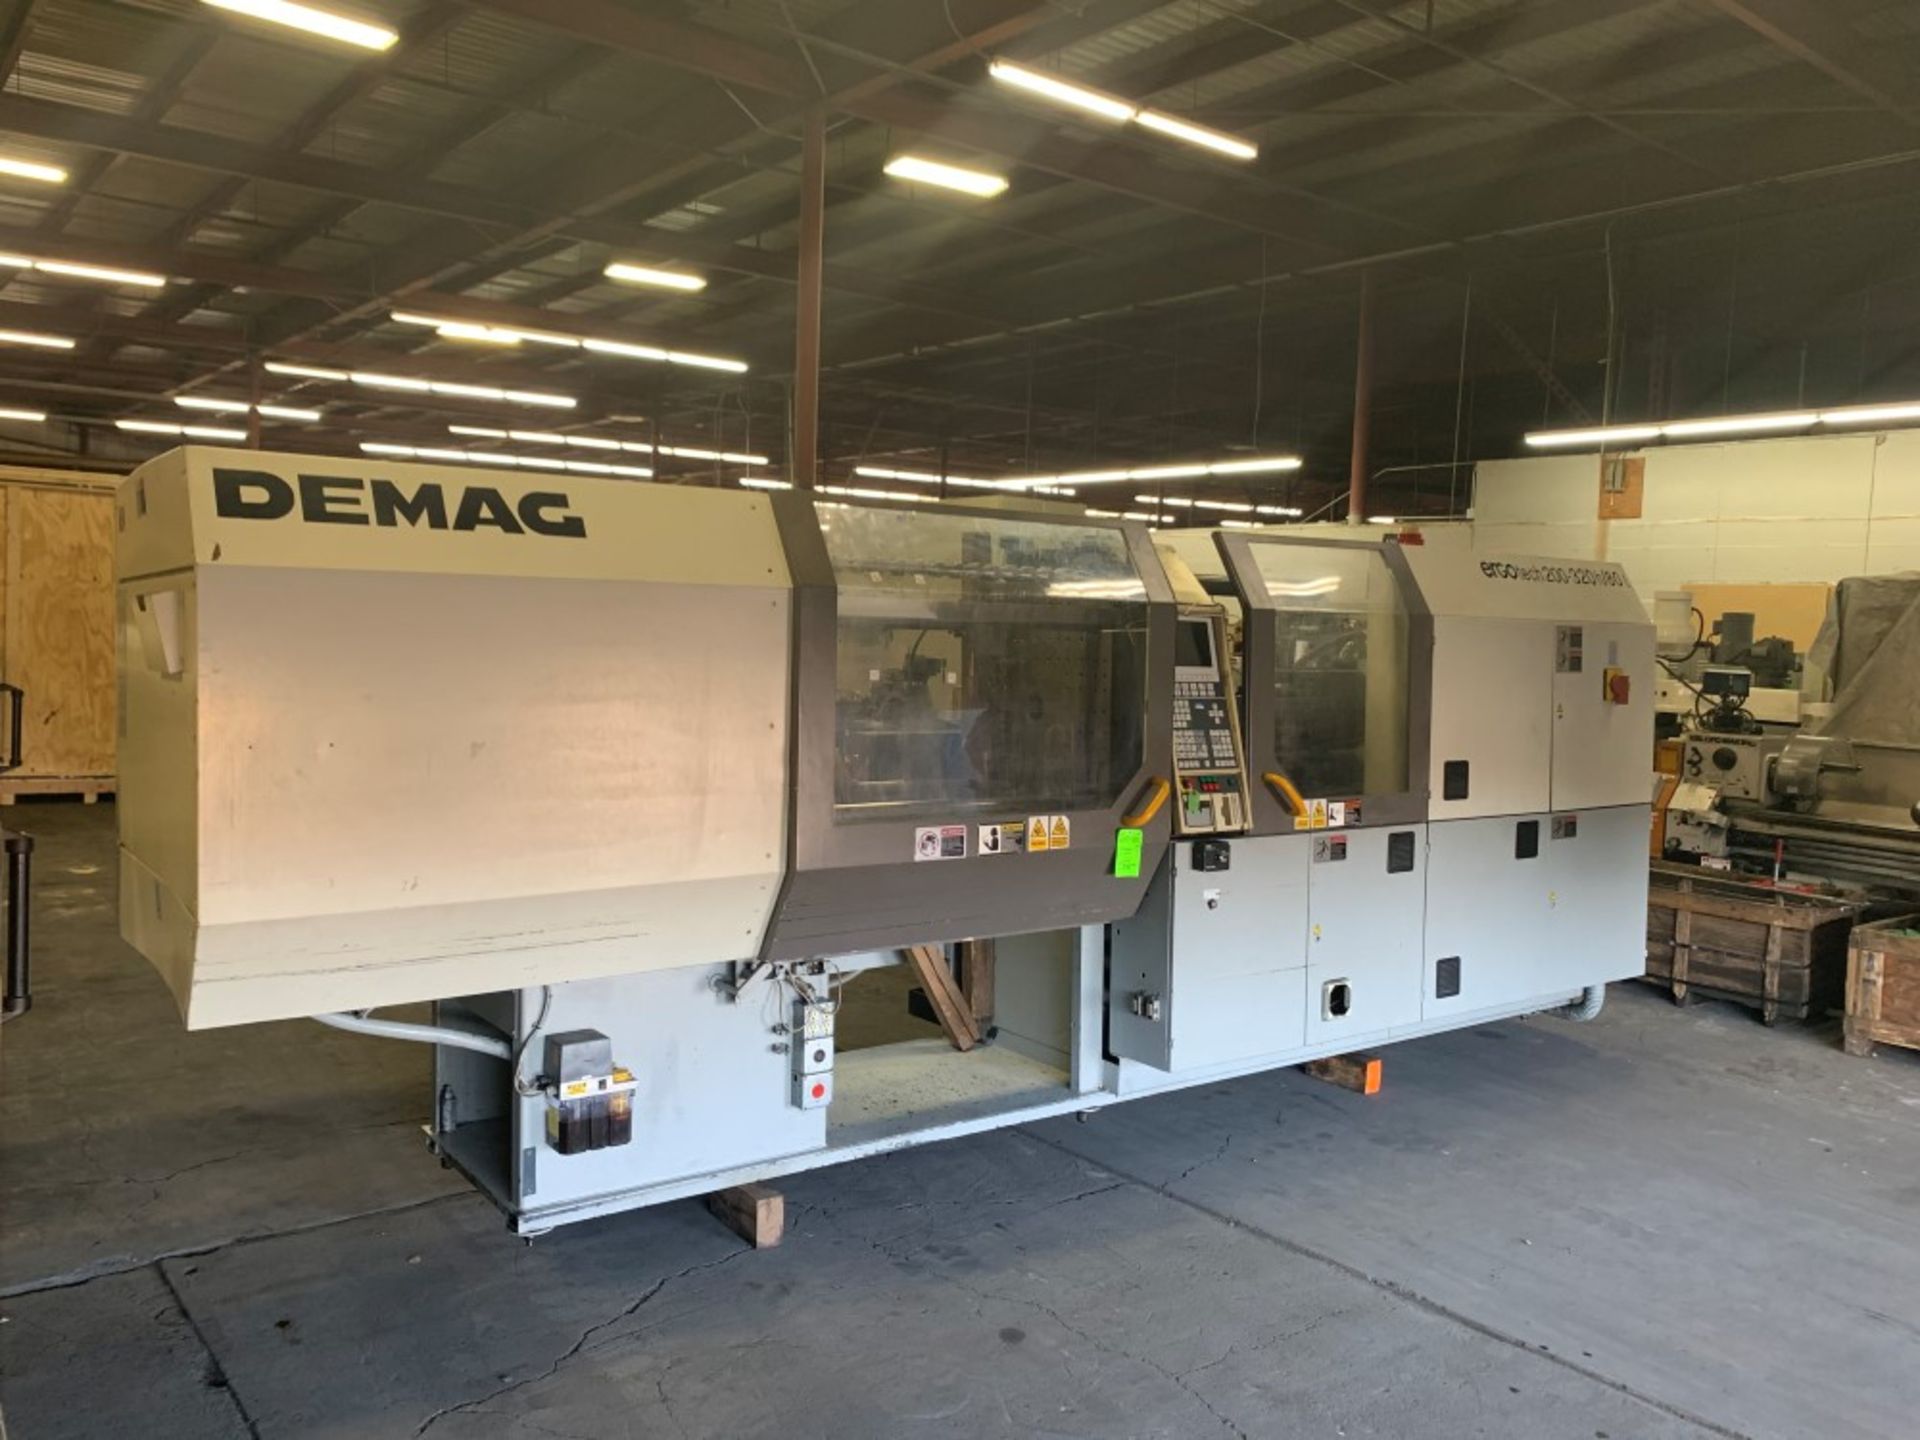 1999 Demag 220 ton 2 shot Injection Molding Machine w/ Rotary Platen Turntable and second